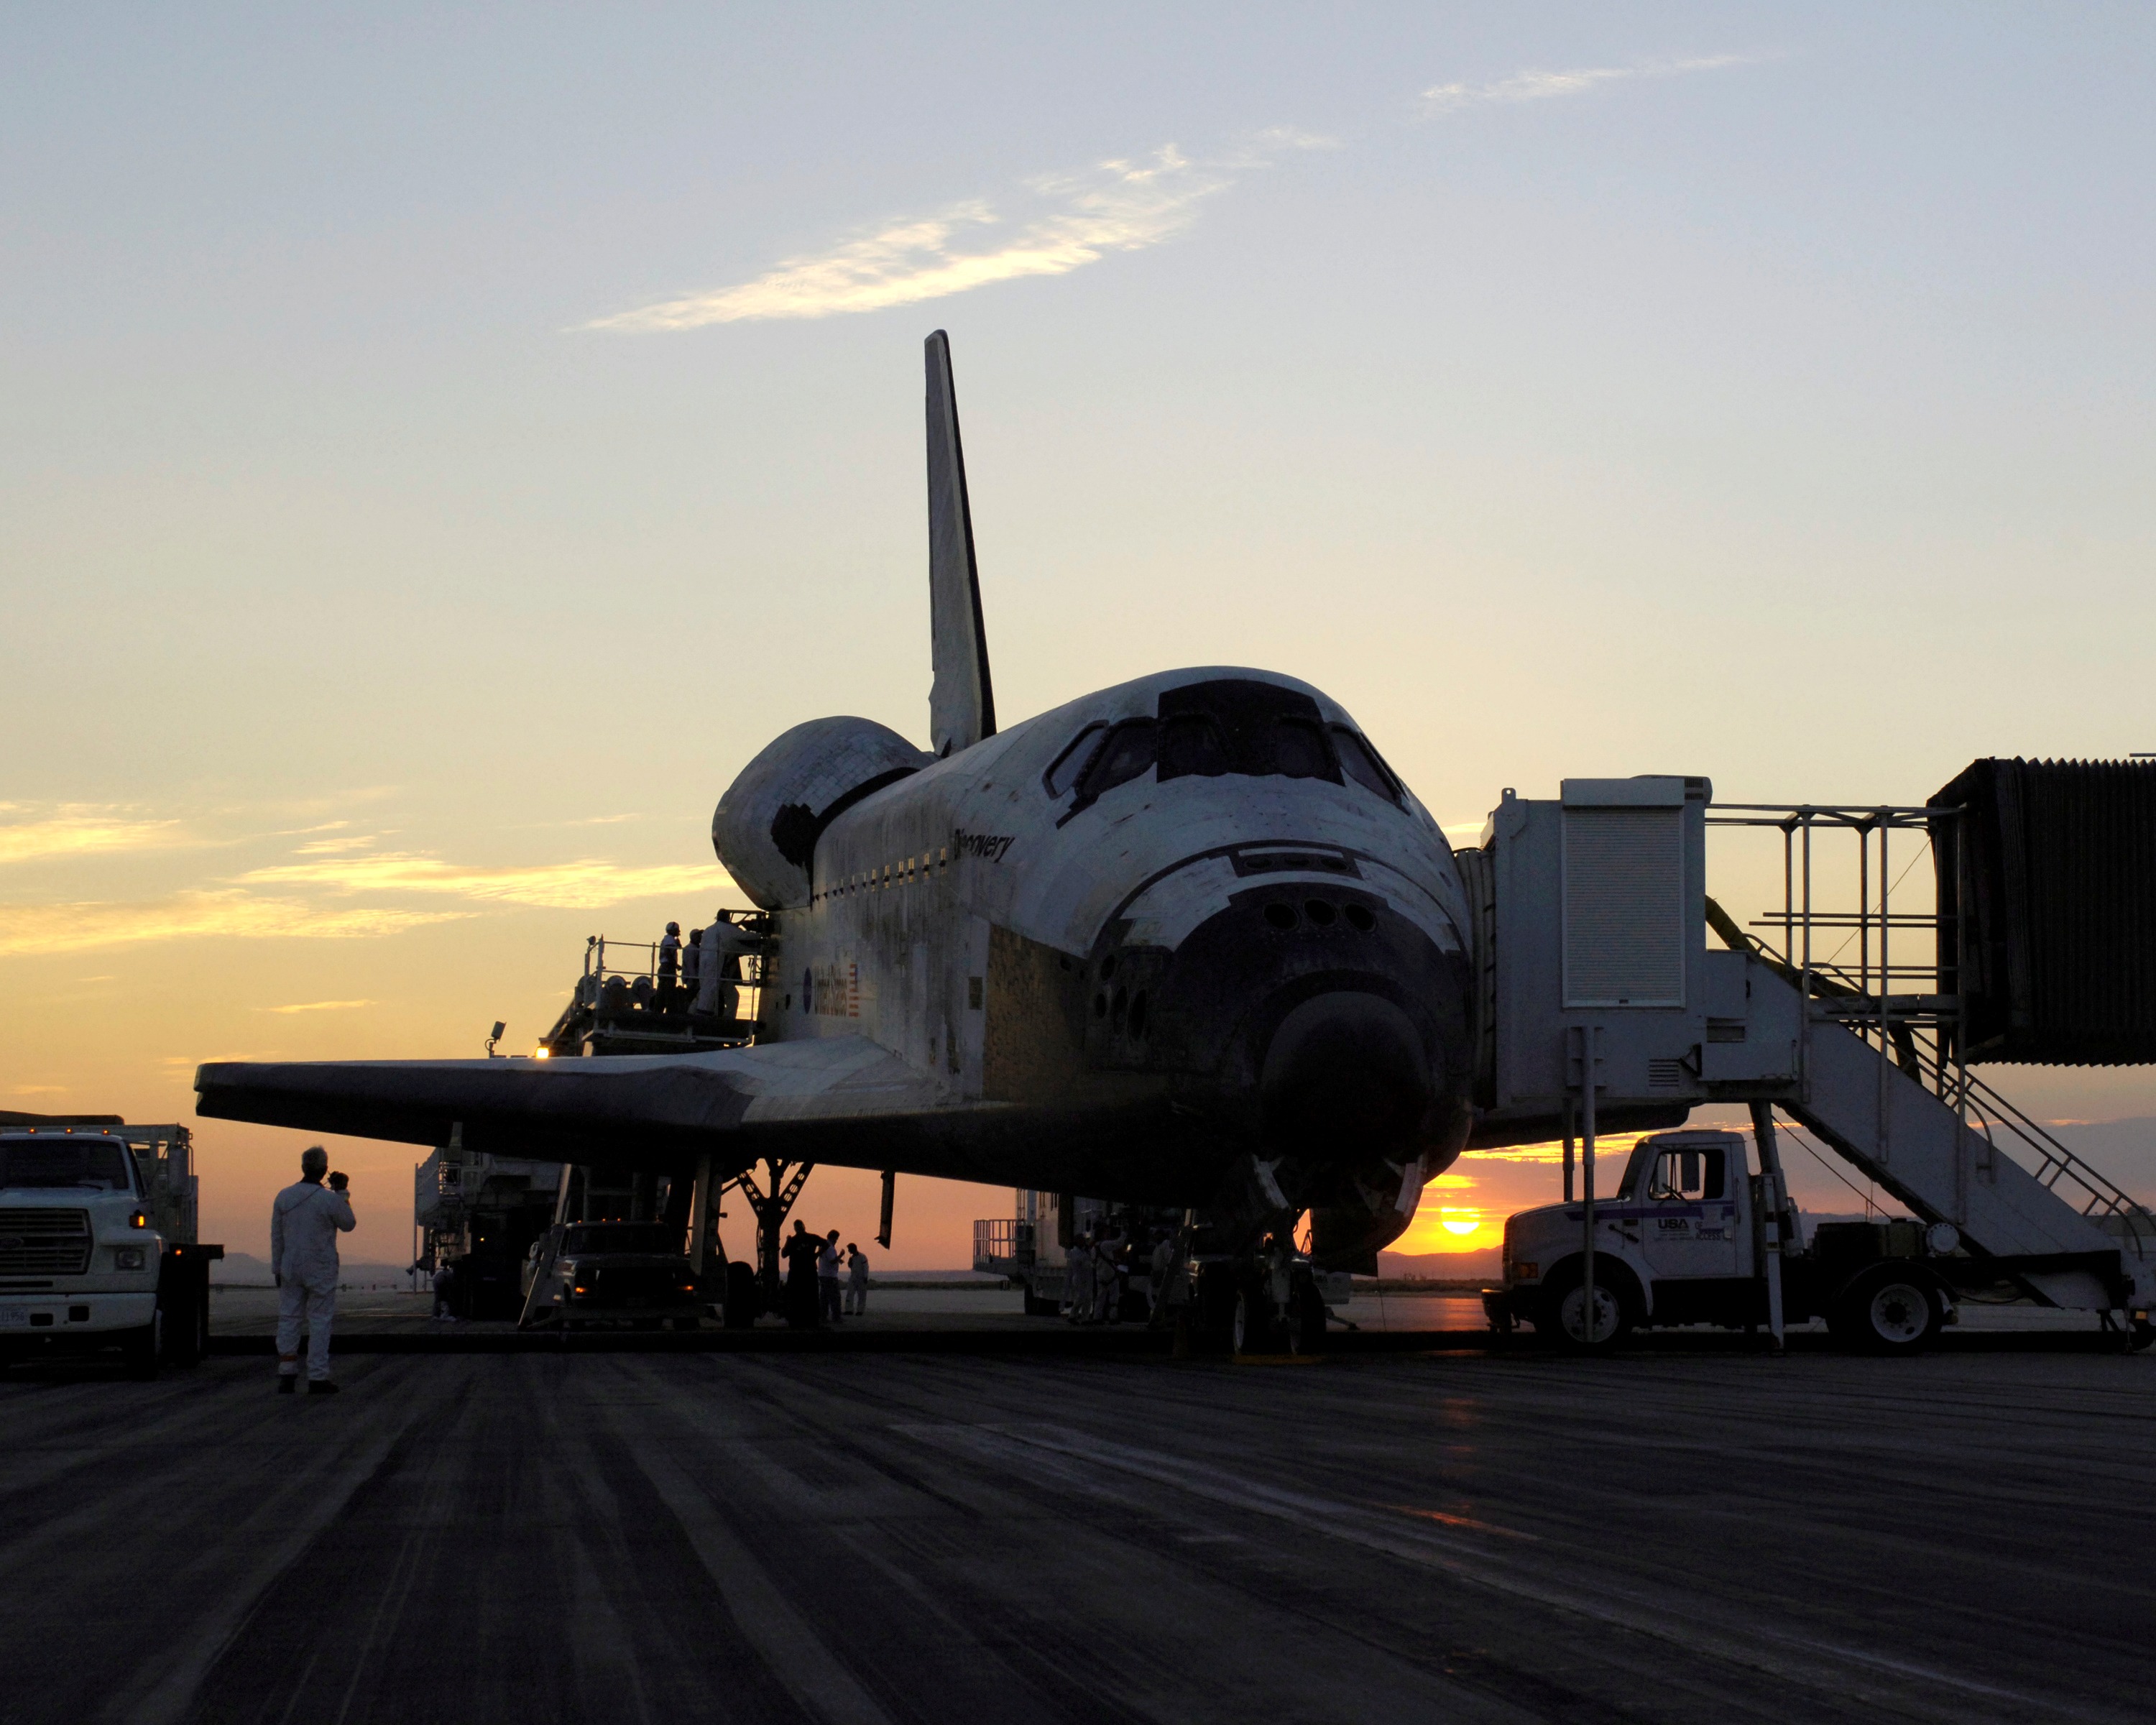 Discovery sits on the runway at Edwards Air Force Base, Calif., on 9 August 2005, after completing STS-114, the first post-Columbia shuttle mission. Photo Credit: NASA